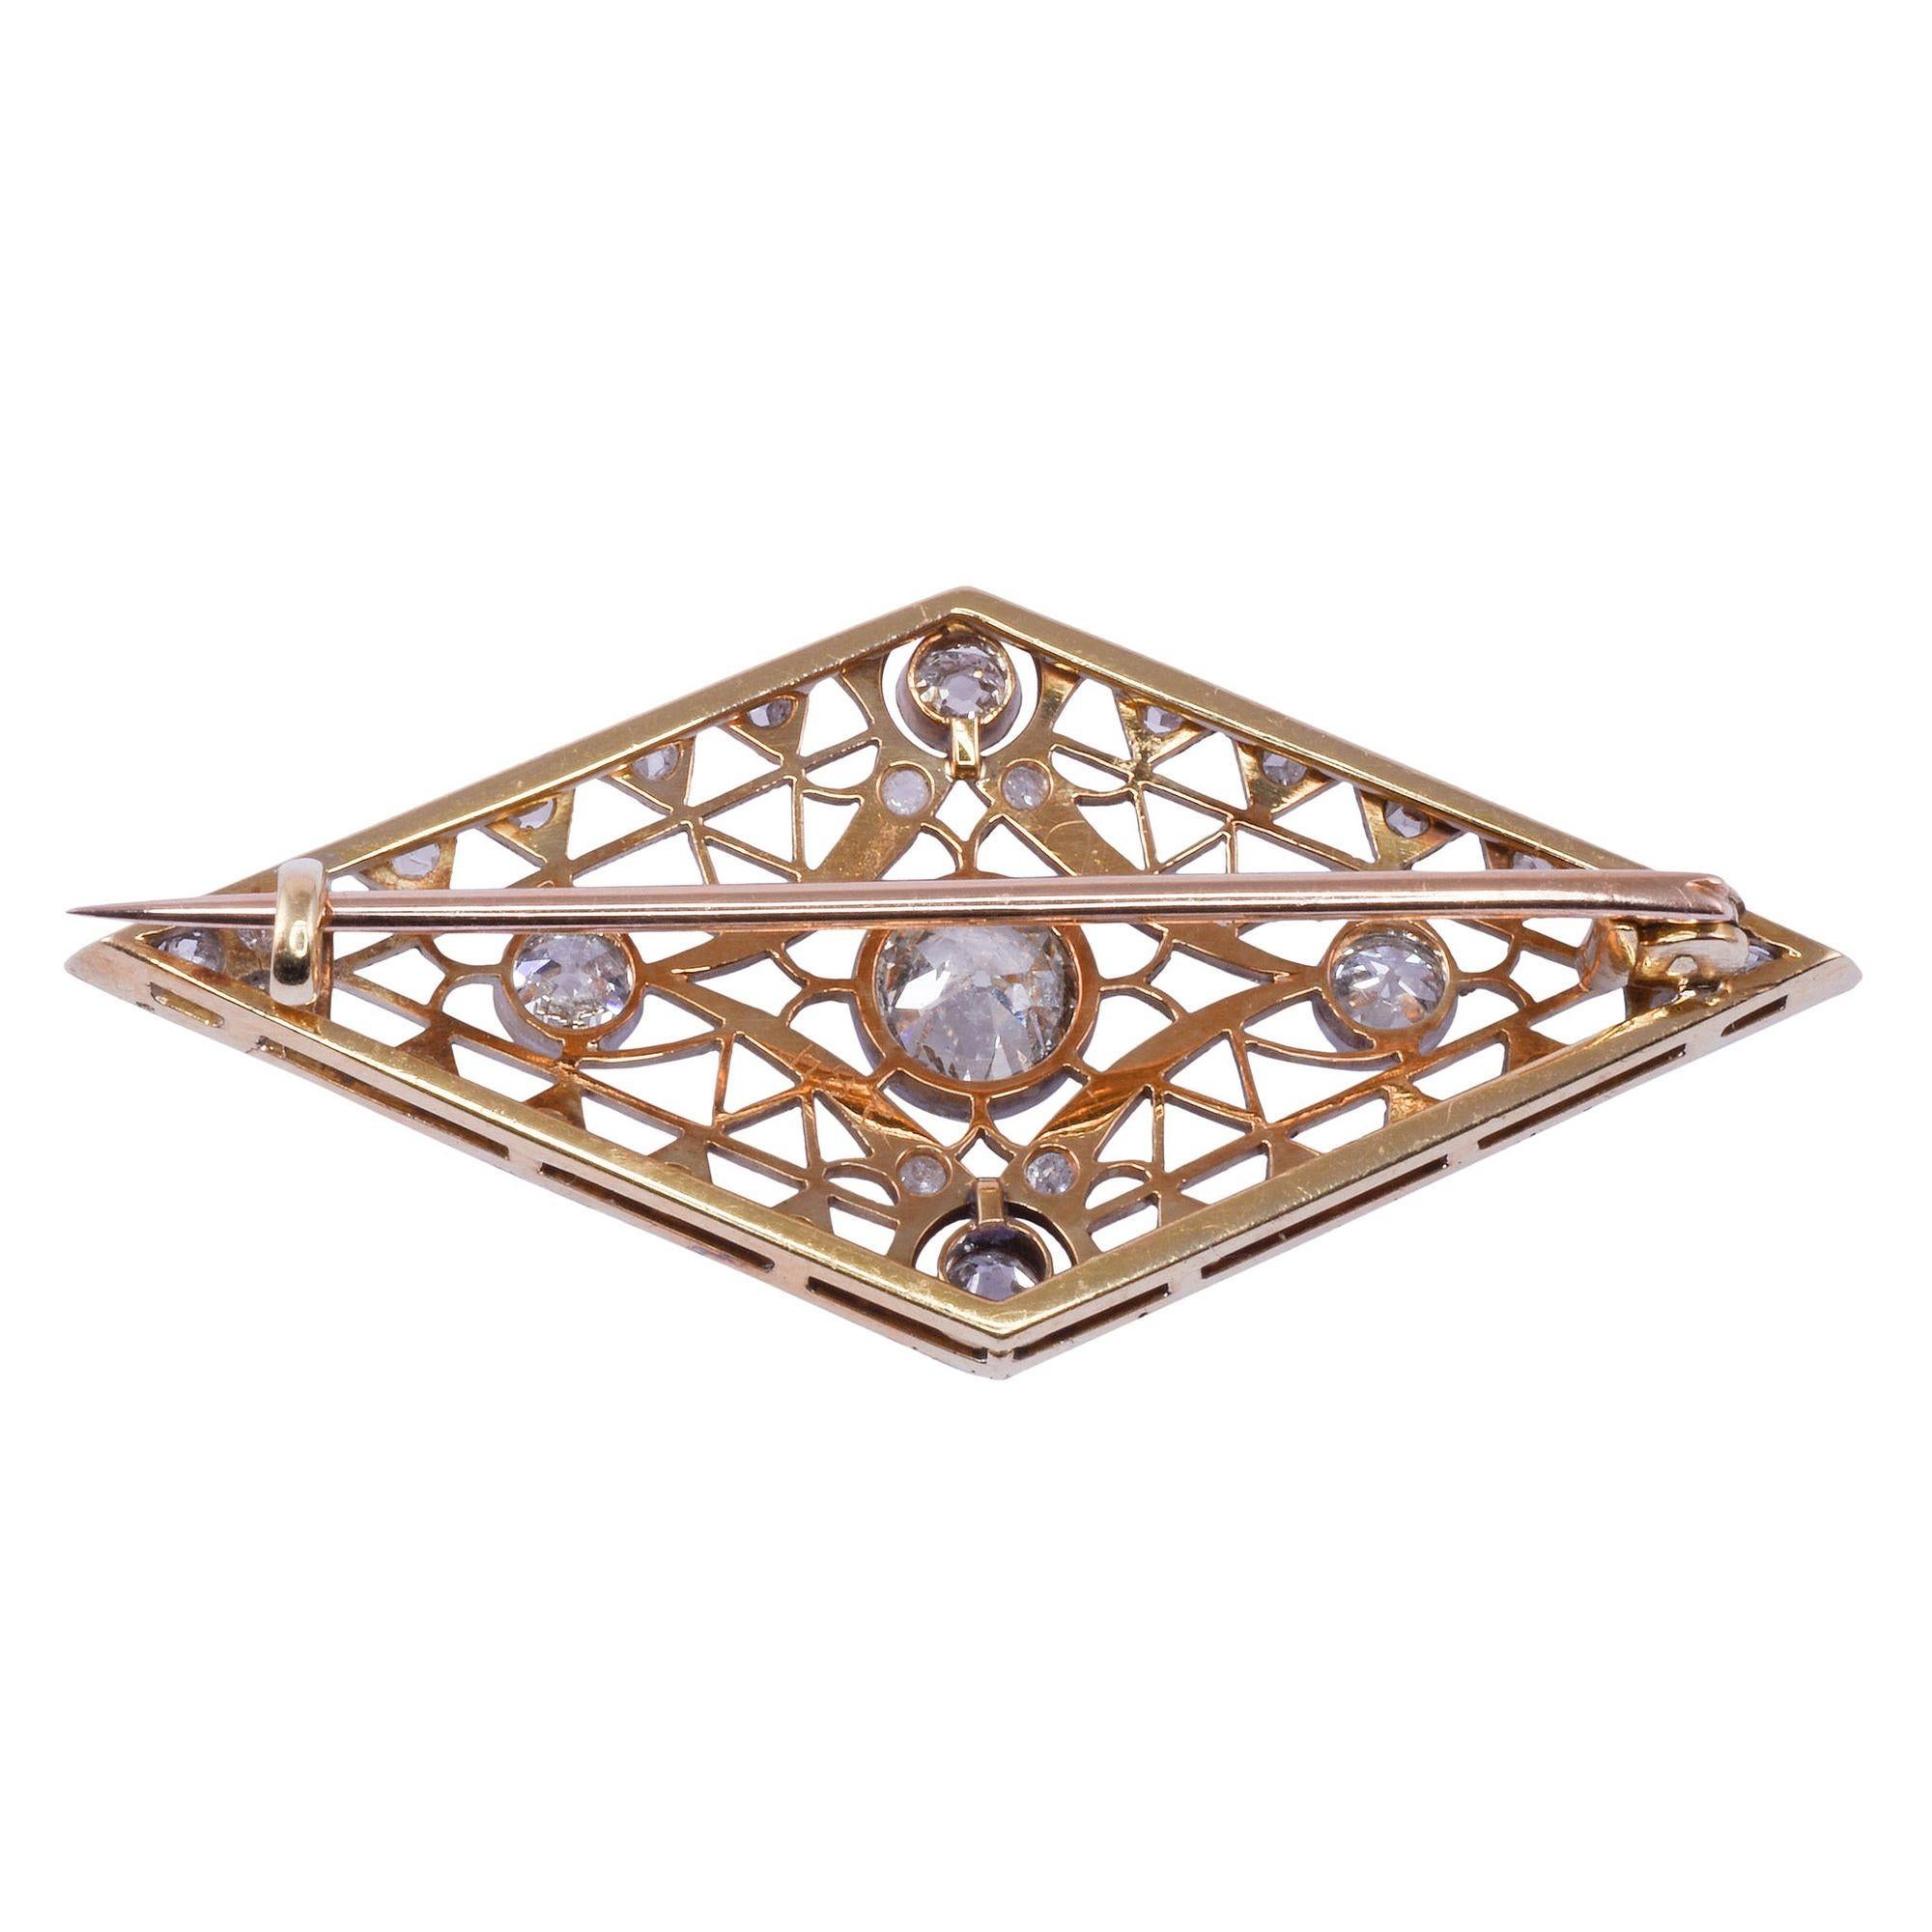 Antique Edwardian diamond 18K & platinum pin, circa 1910. This antique pin is crafted in 18 karat yellow gold and platinum. The lozenge shaped Edwardian pin features a .75 carat center diamond with I1 clarity and K color. There are also four old